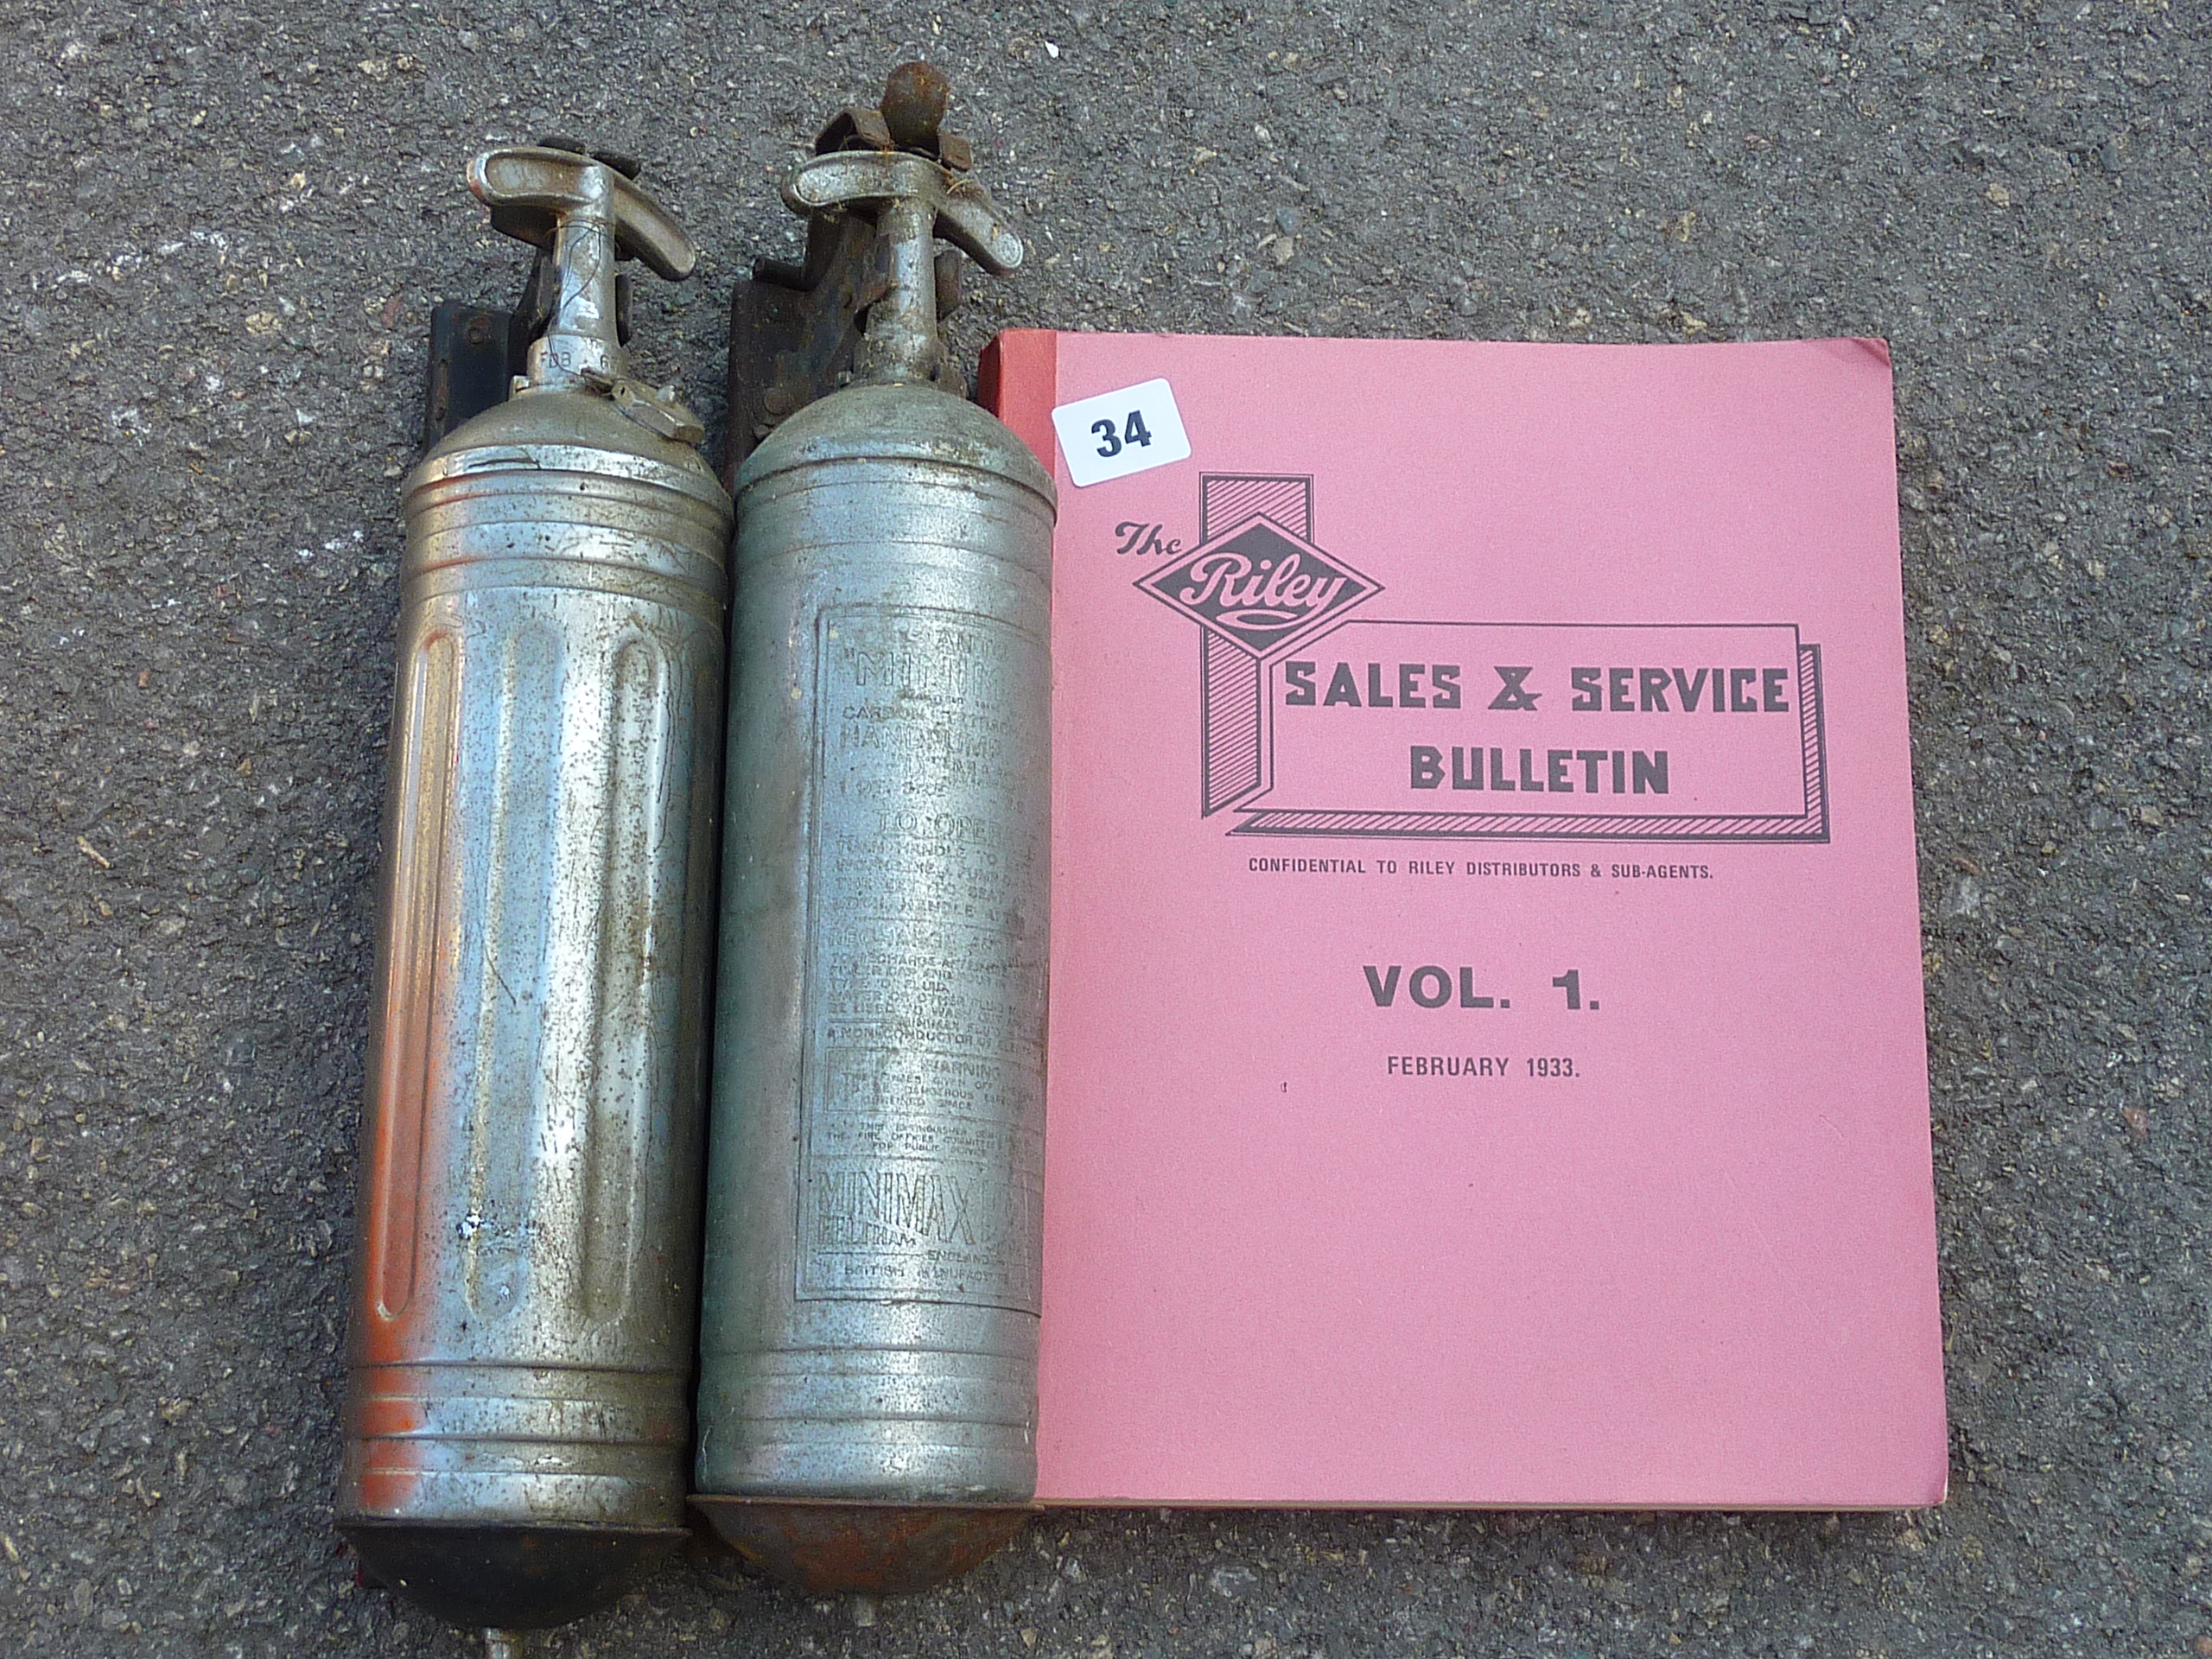 PYRENE AND MINI MAX FIRE EXTINGUISHER AND A REPRINT OF A 1933 RILEY SALES AND SERVICE BULLETIN